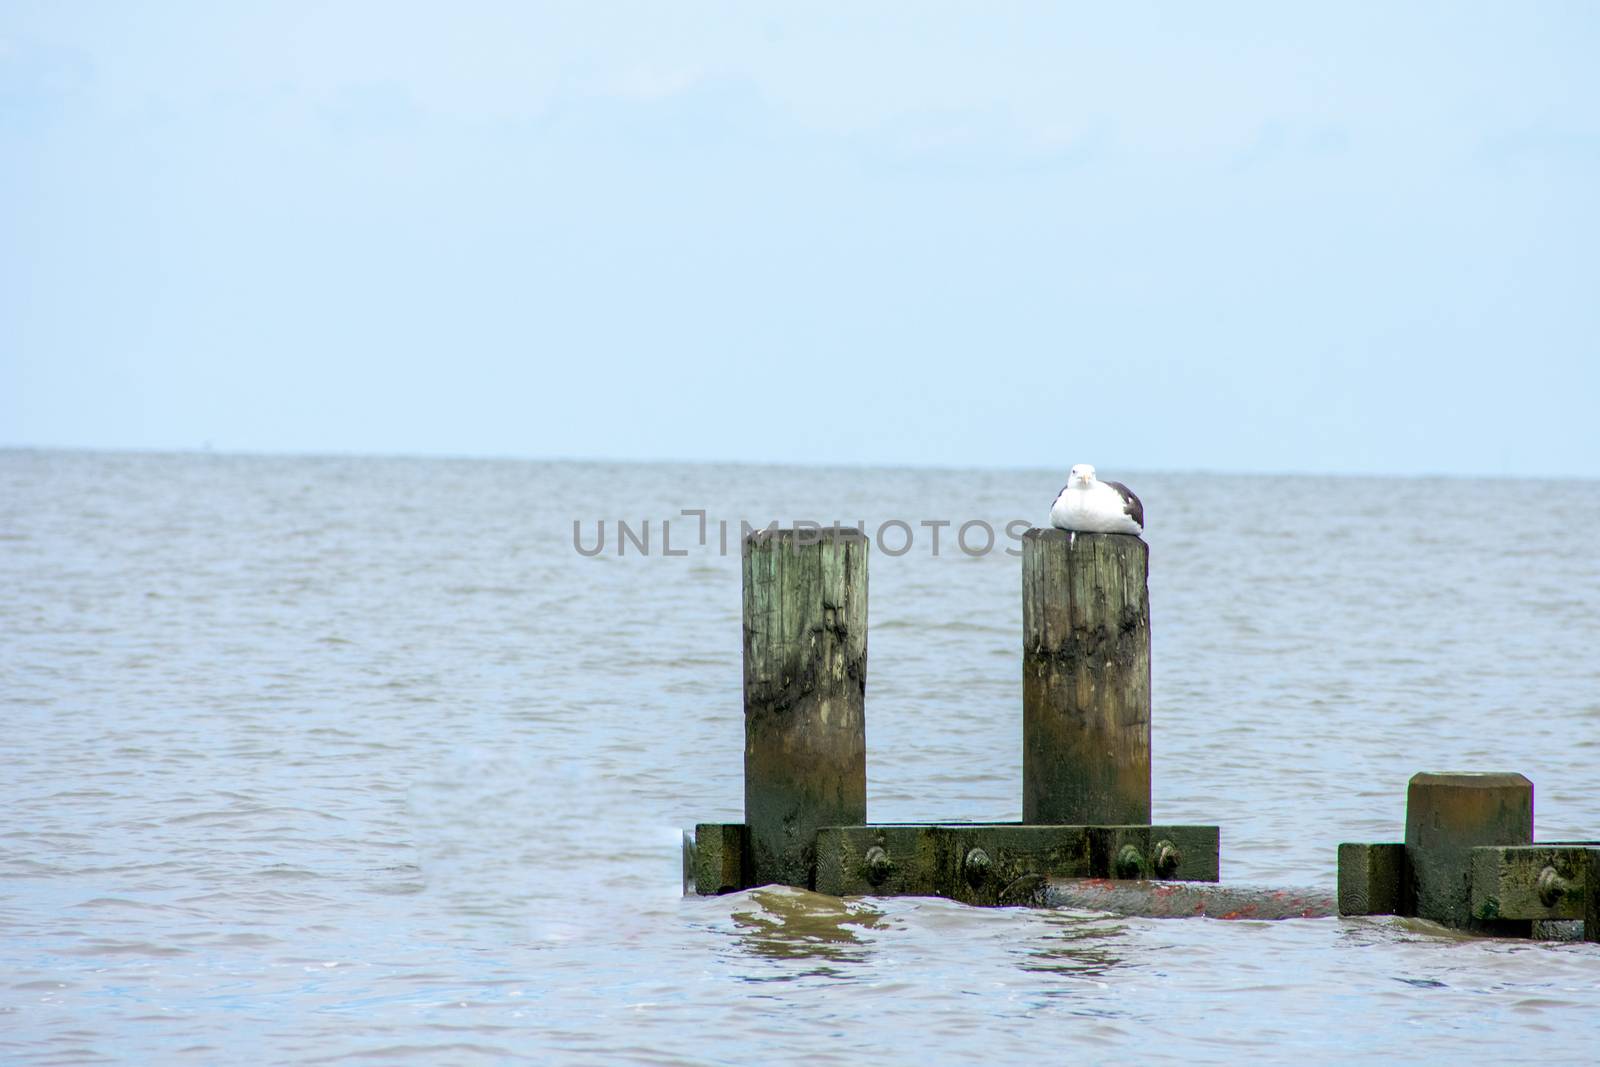 A Wooden Pole Sticking Up Out of the Water With a Large Seagull  by bju12290